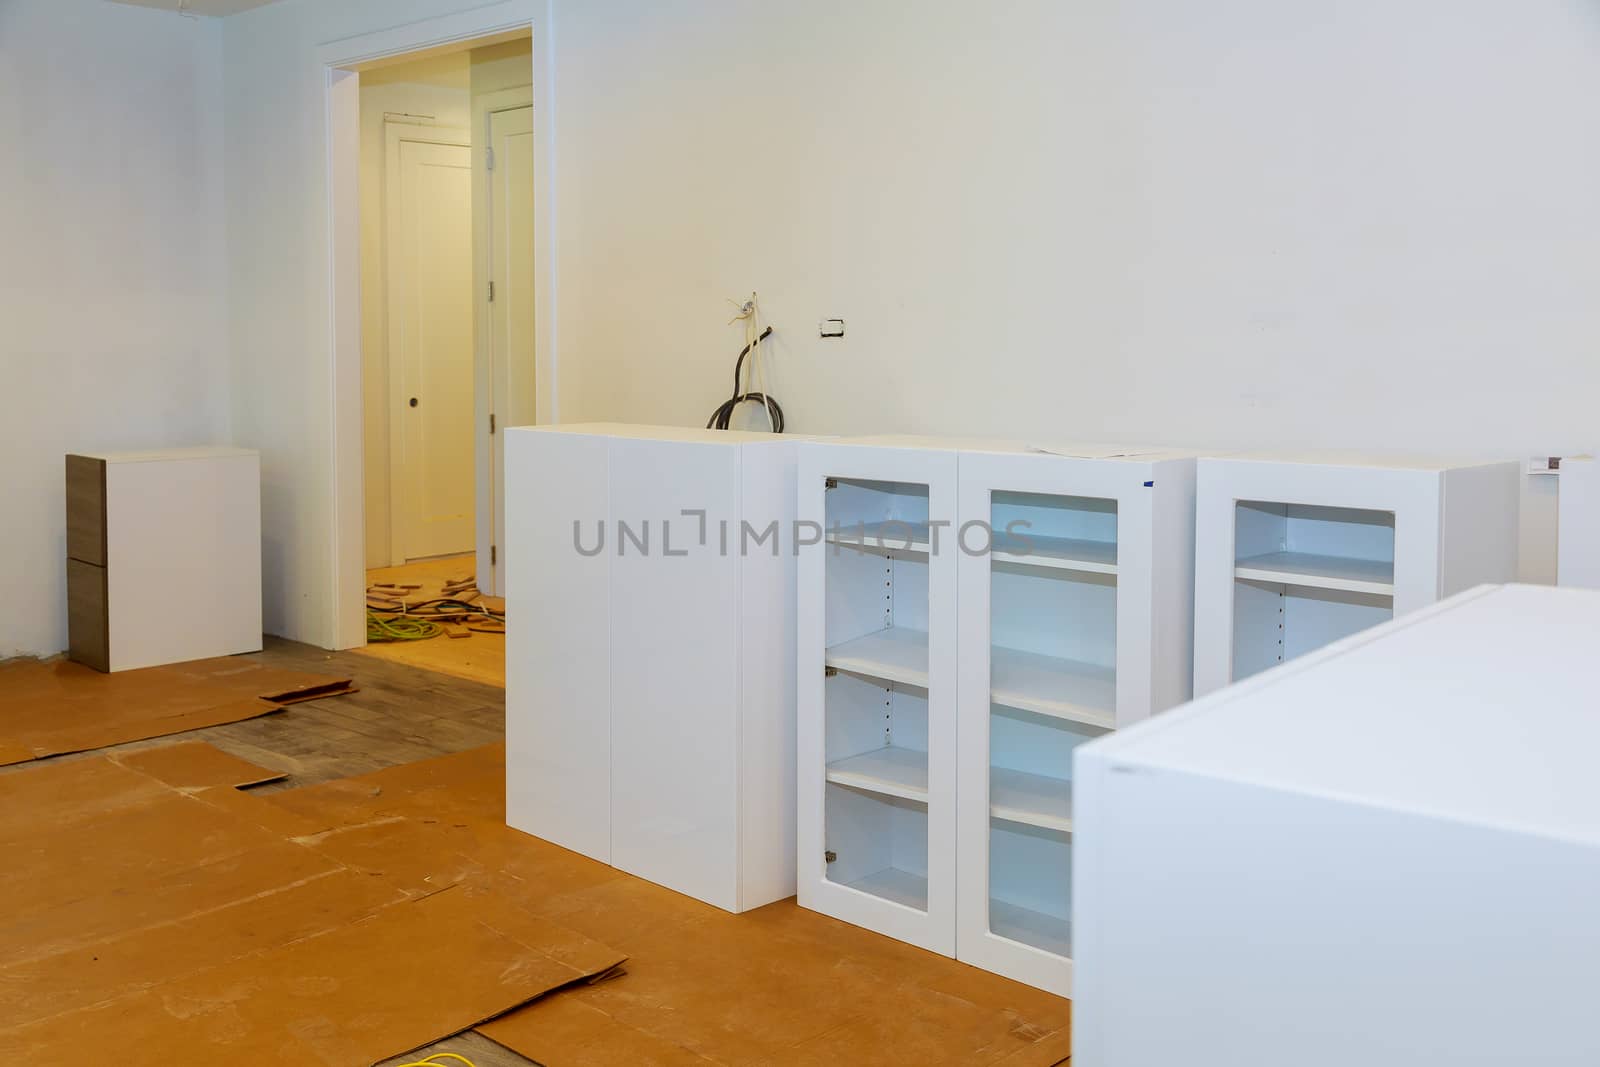 Modern domestic cabinets with new appliances and sink in kitchen by ungvar